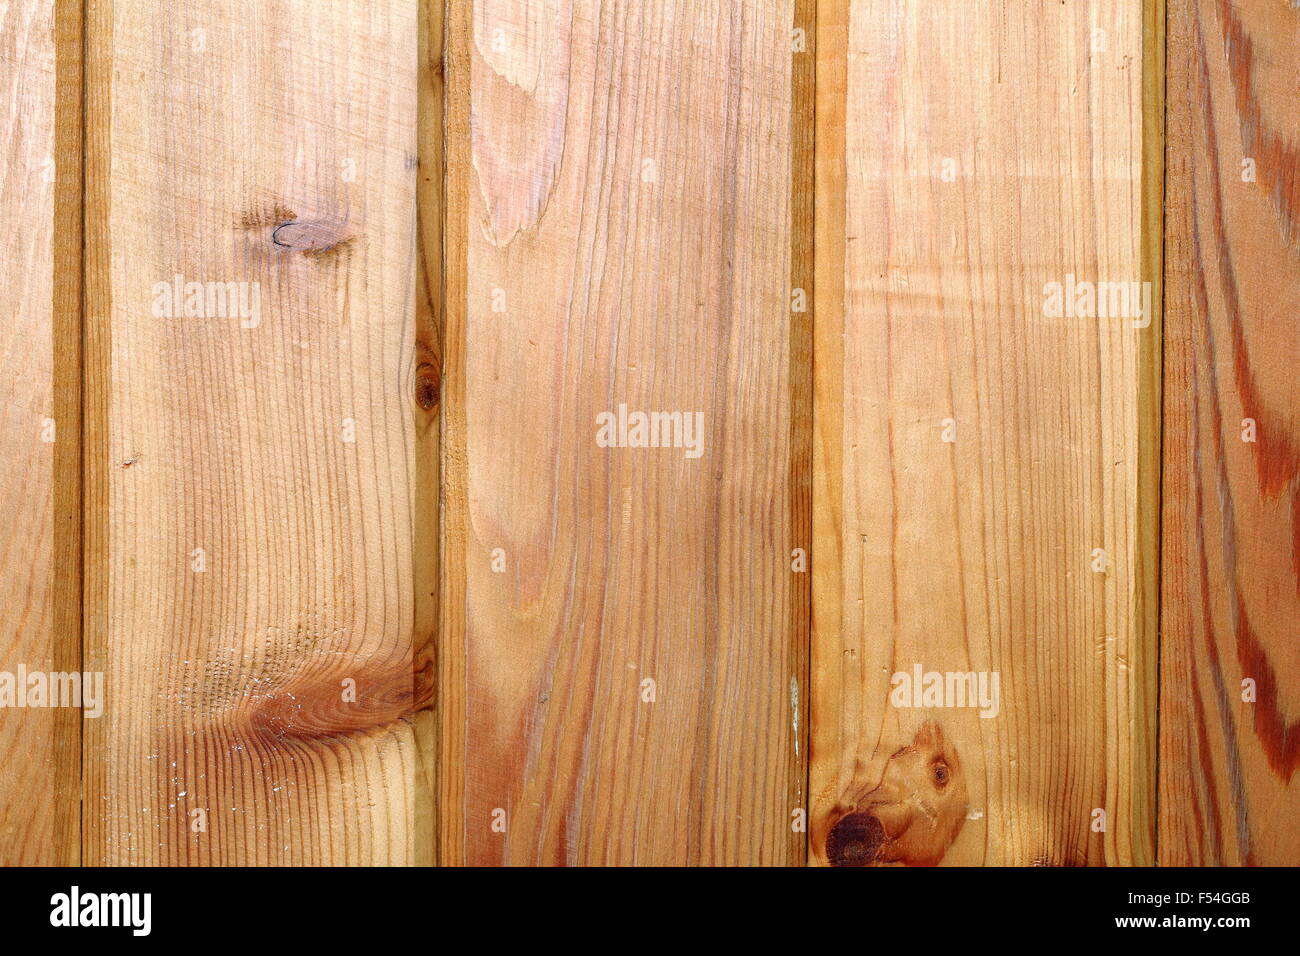 spruce boards texture ready for your architectural design Stock Photo